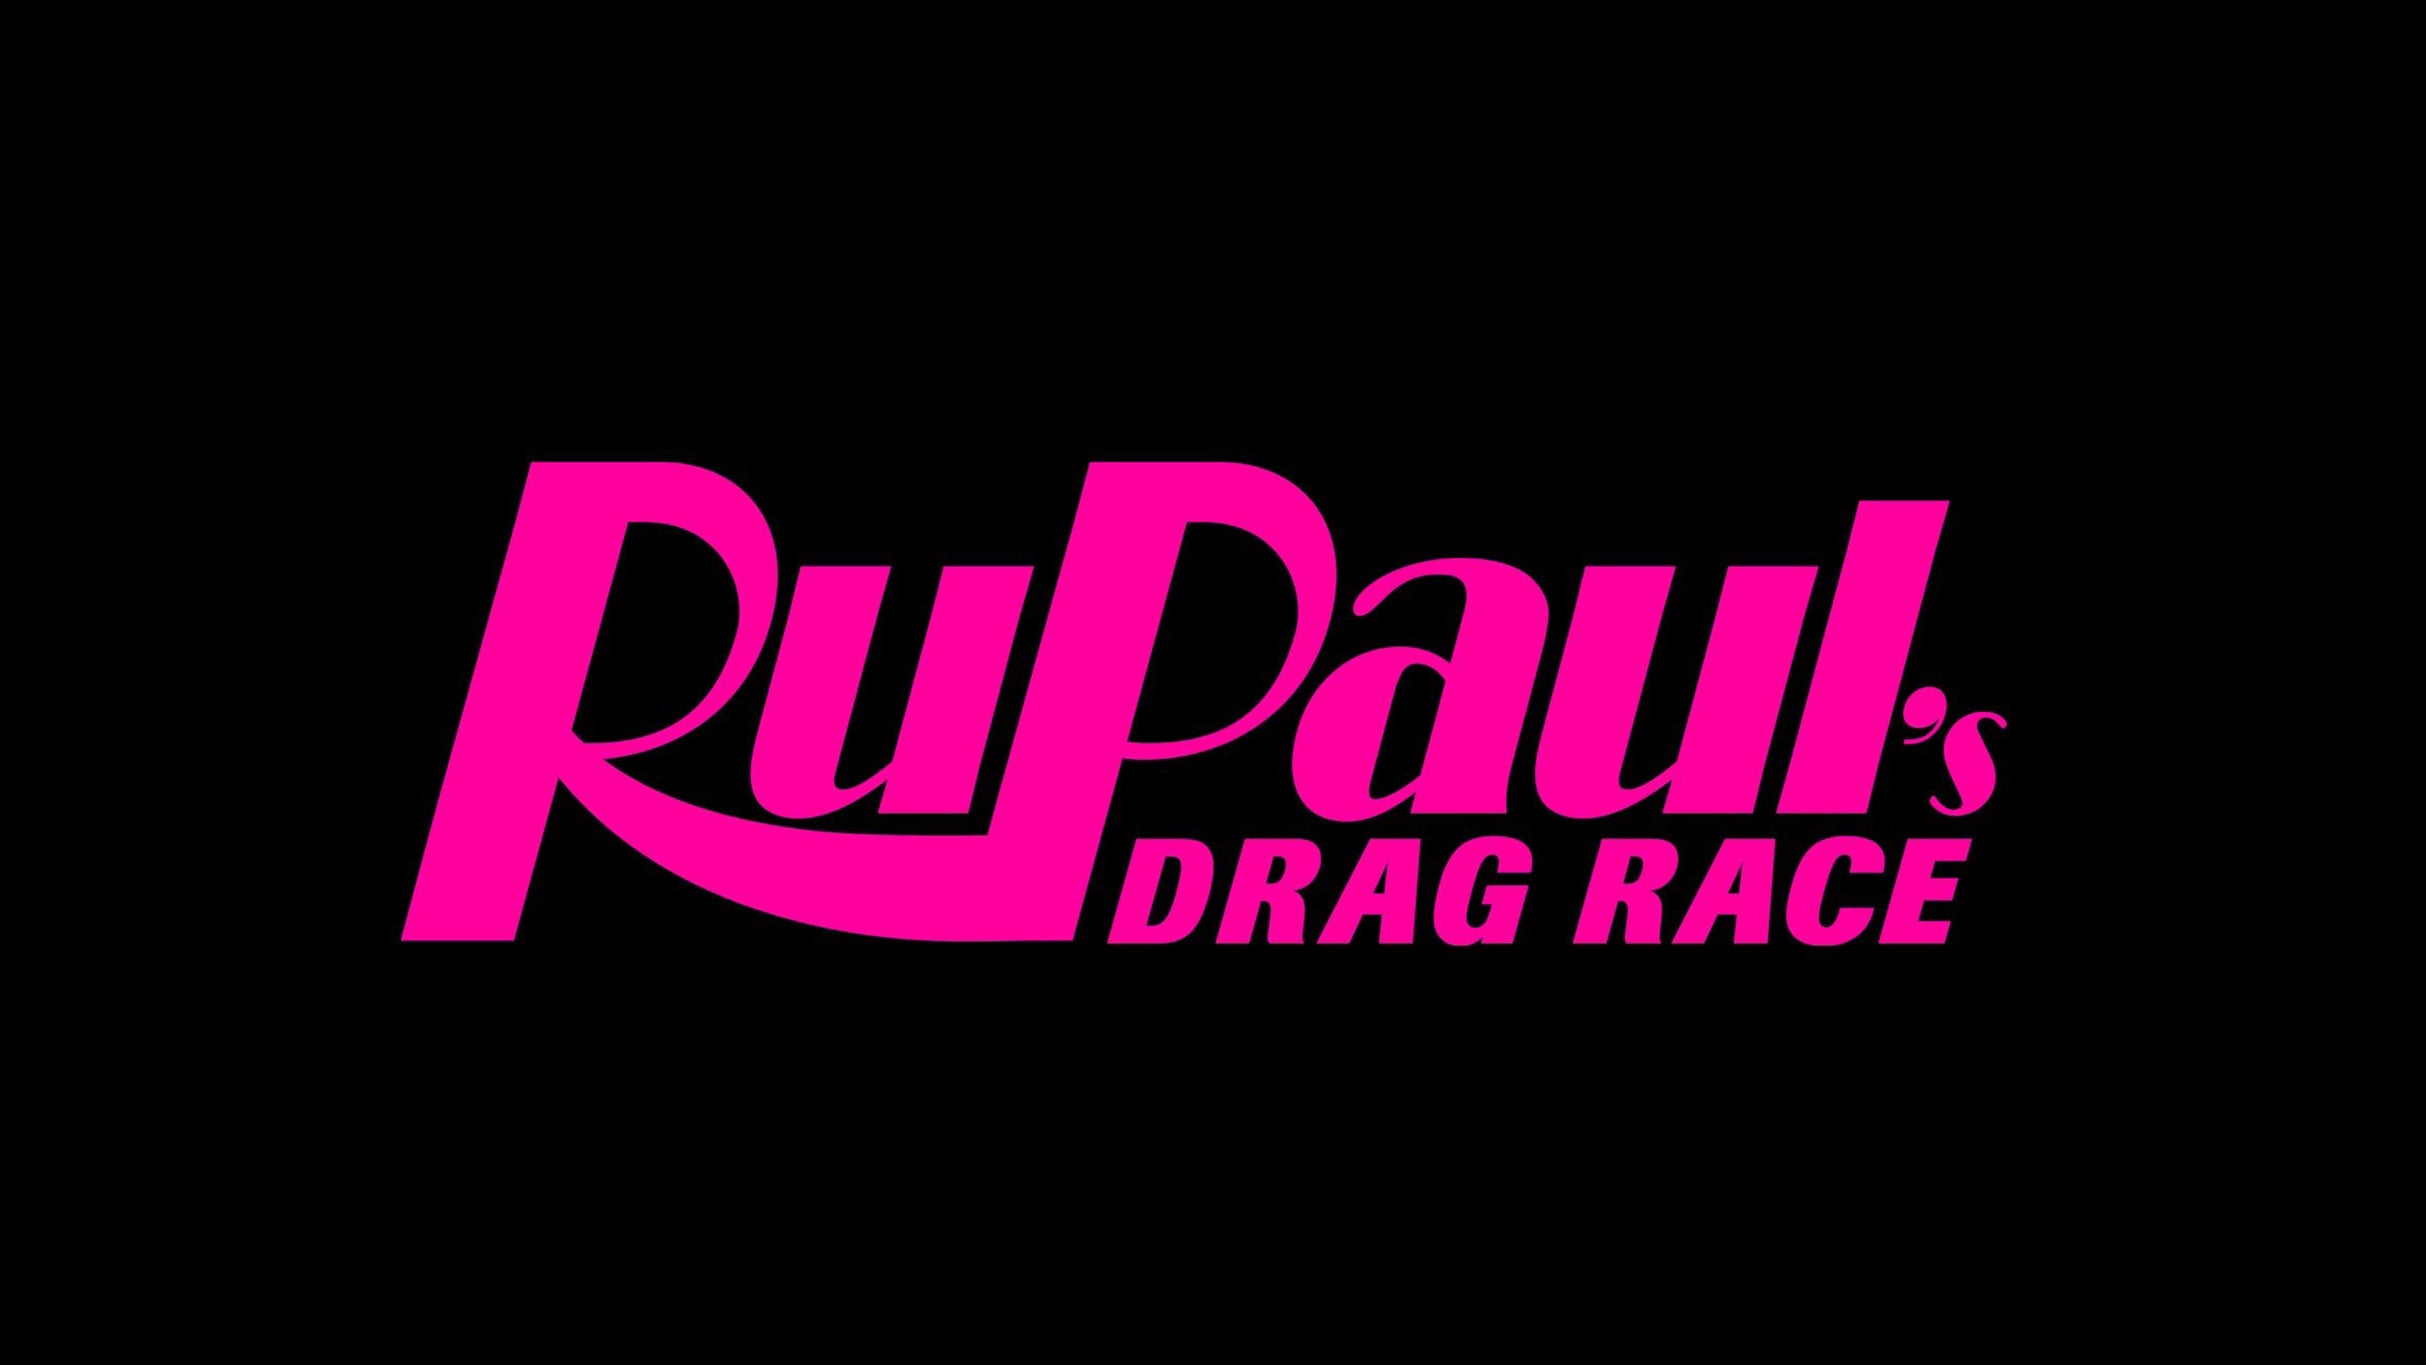 RuPaul's Drag Race: Night of the Living Drag free presale code for show tickets in Memphis, TN (The Orpheum Theatre Memphis)